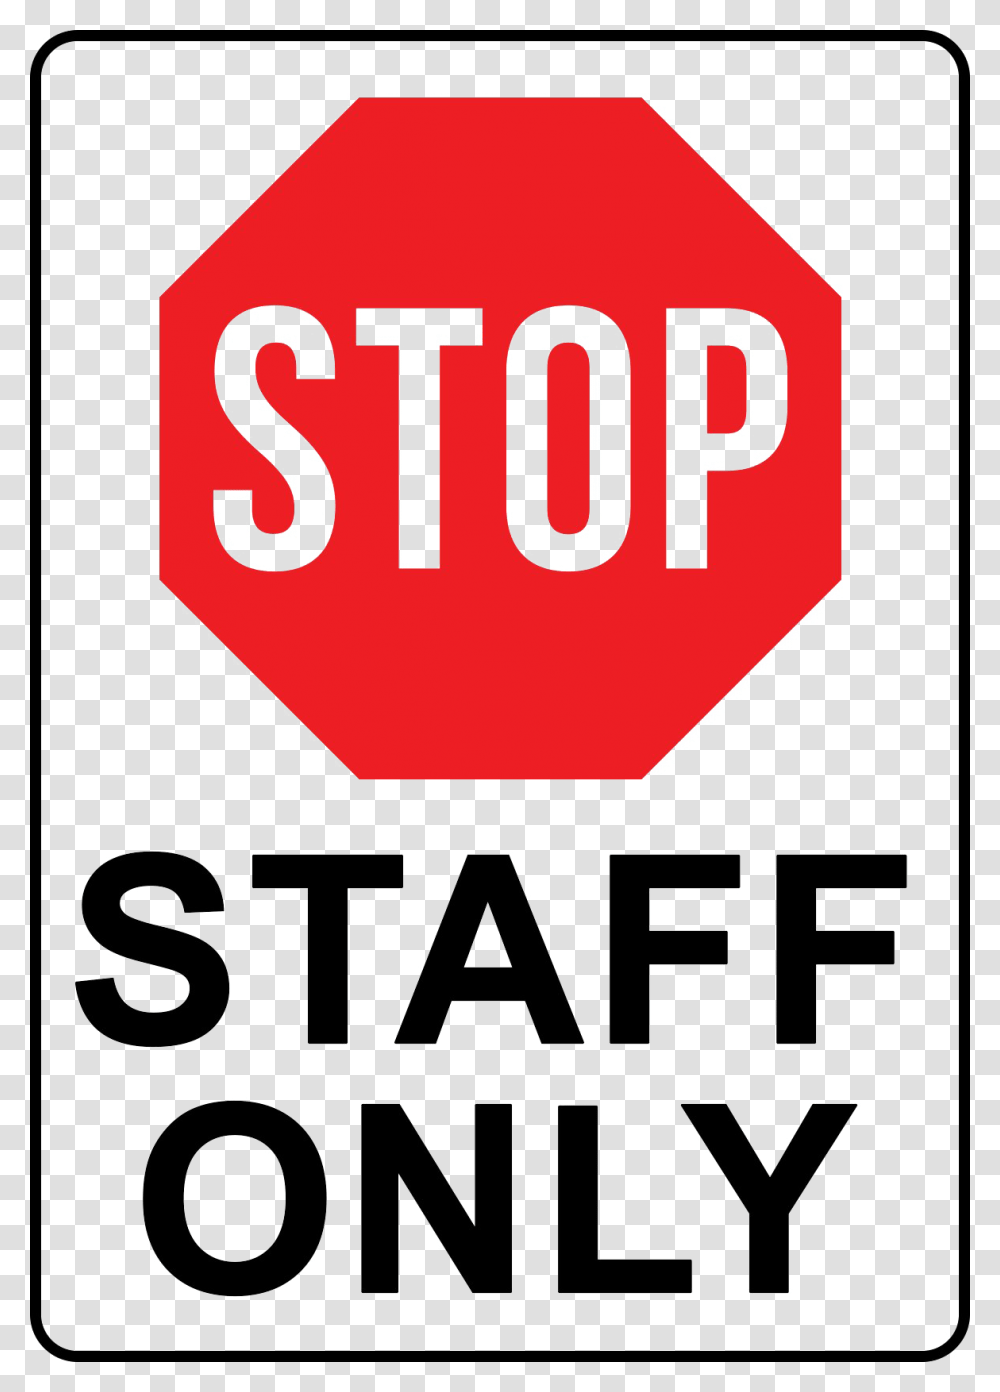 Stop Staff Only Sign, Road Sign, Stopsign Transparent Png